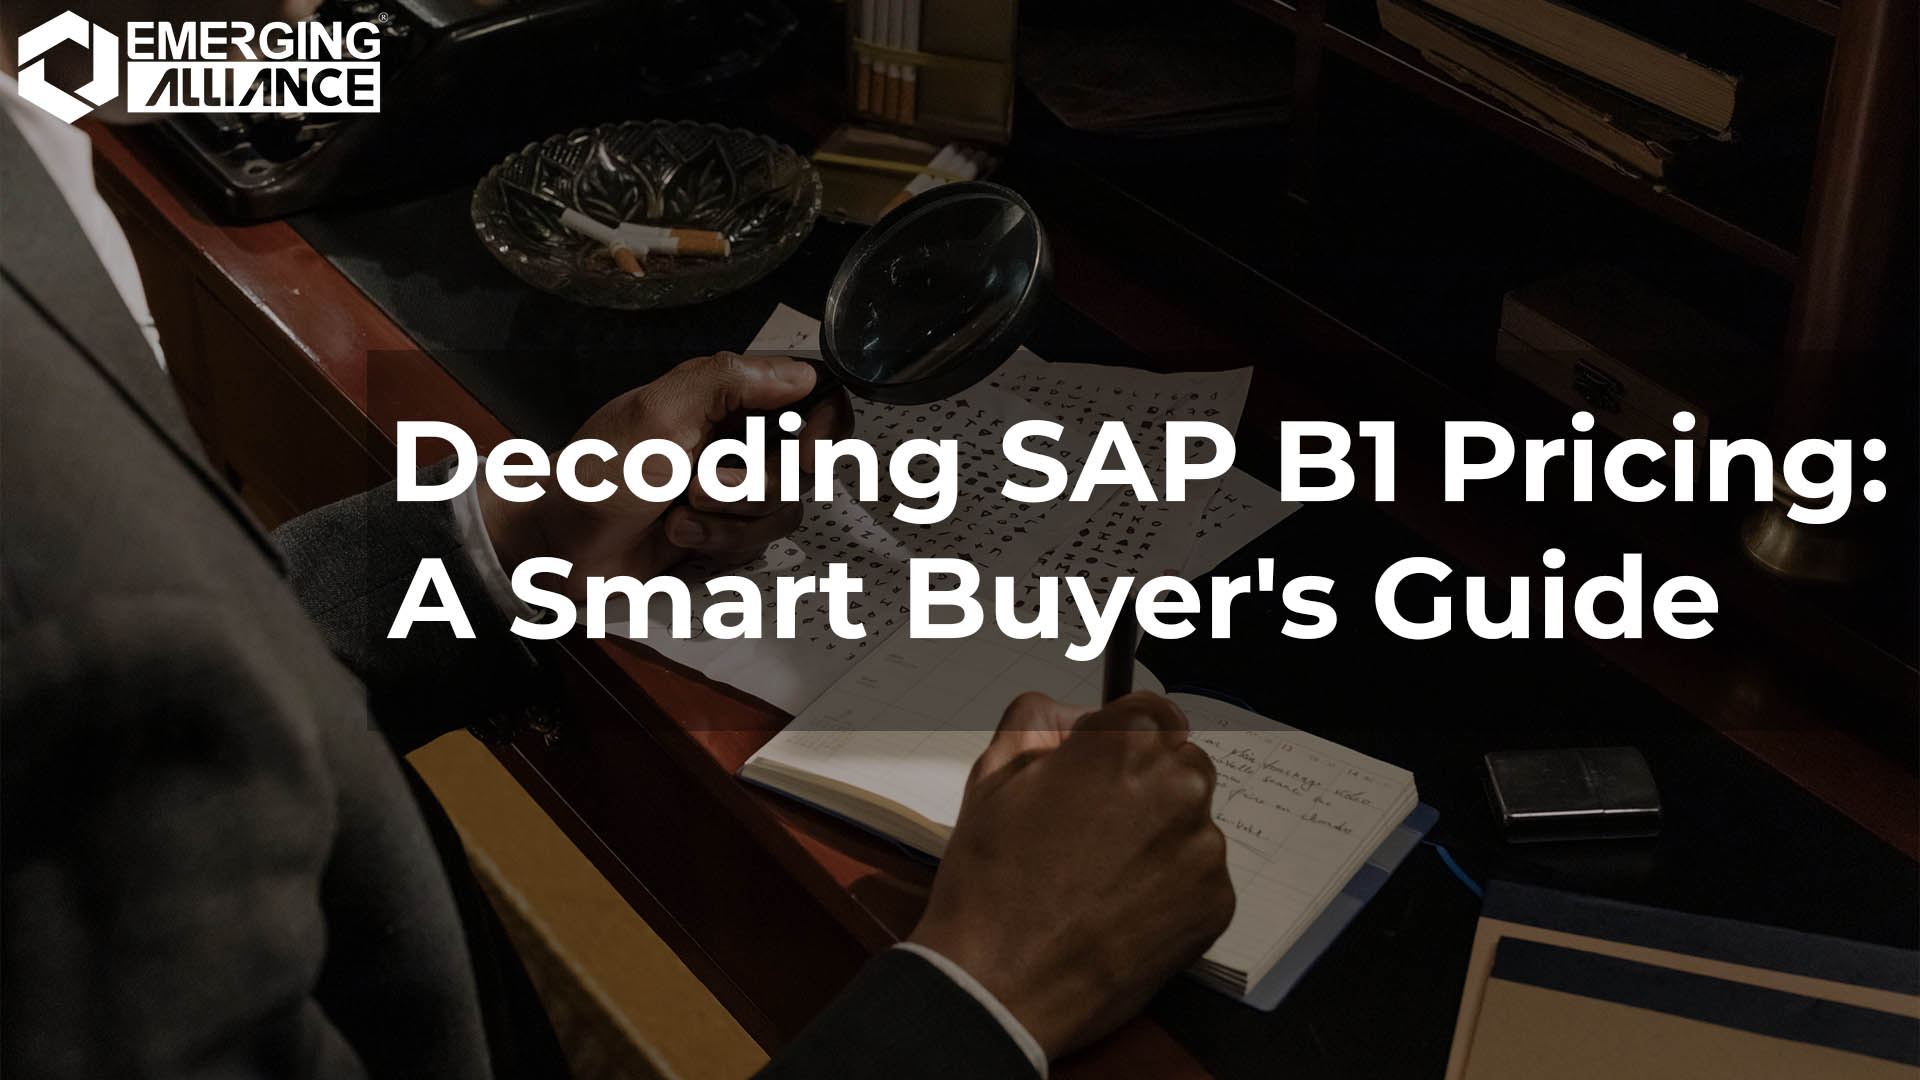 SAP B1 (Business One) Pricing